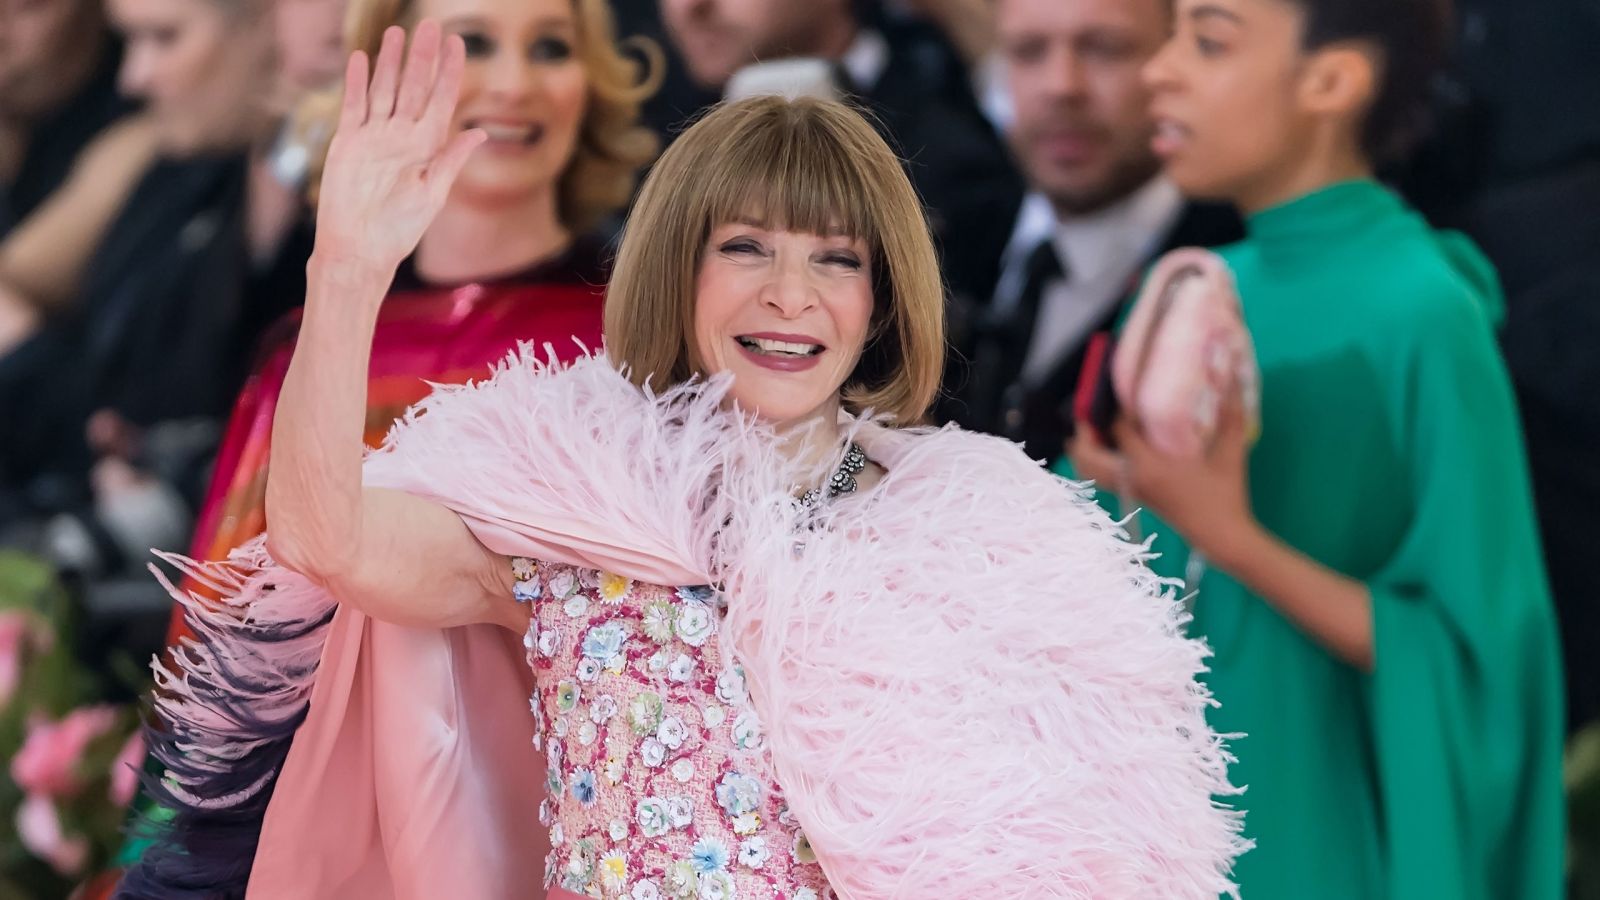 anna wintour waving and smiling at the met gala 2019 